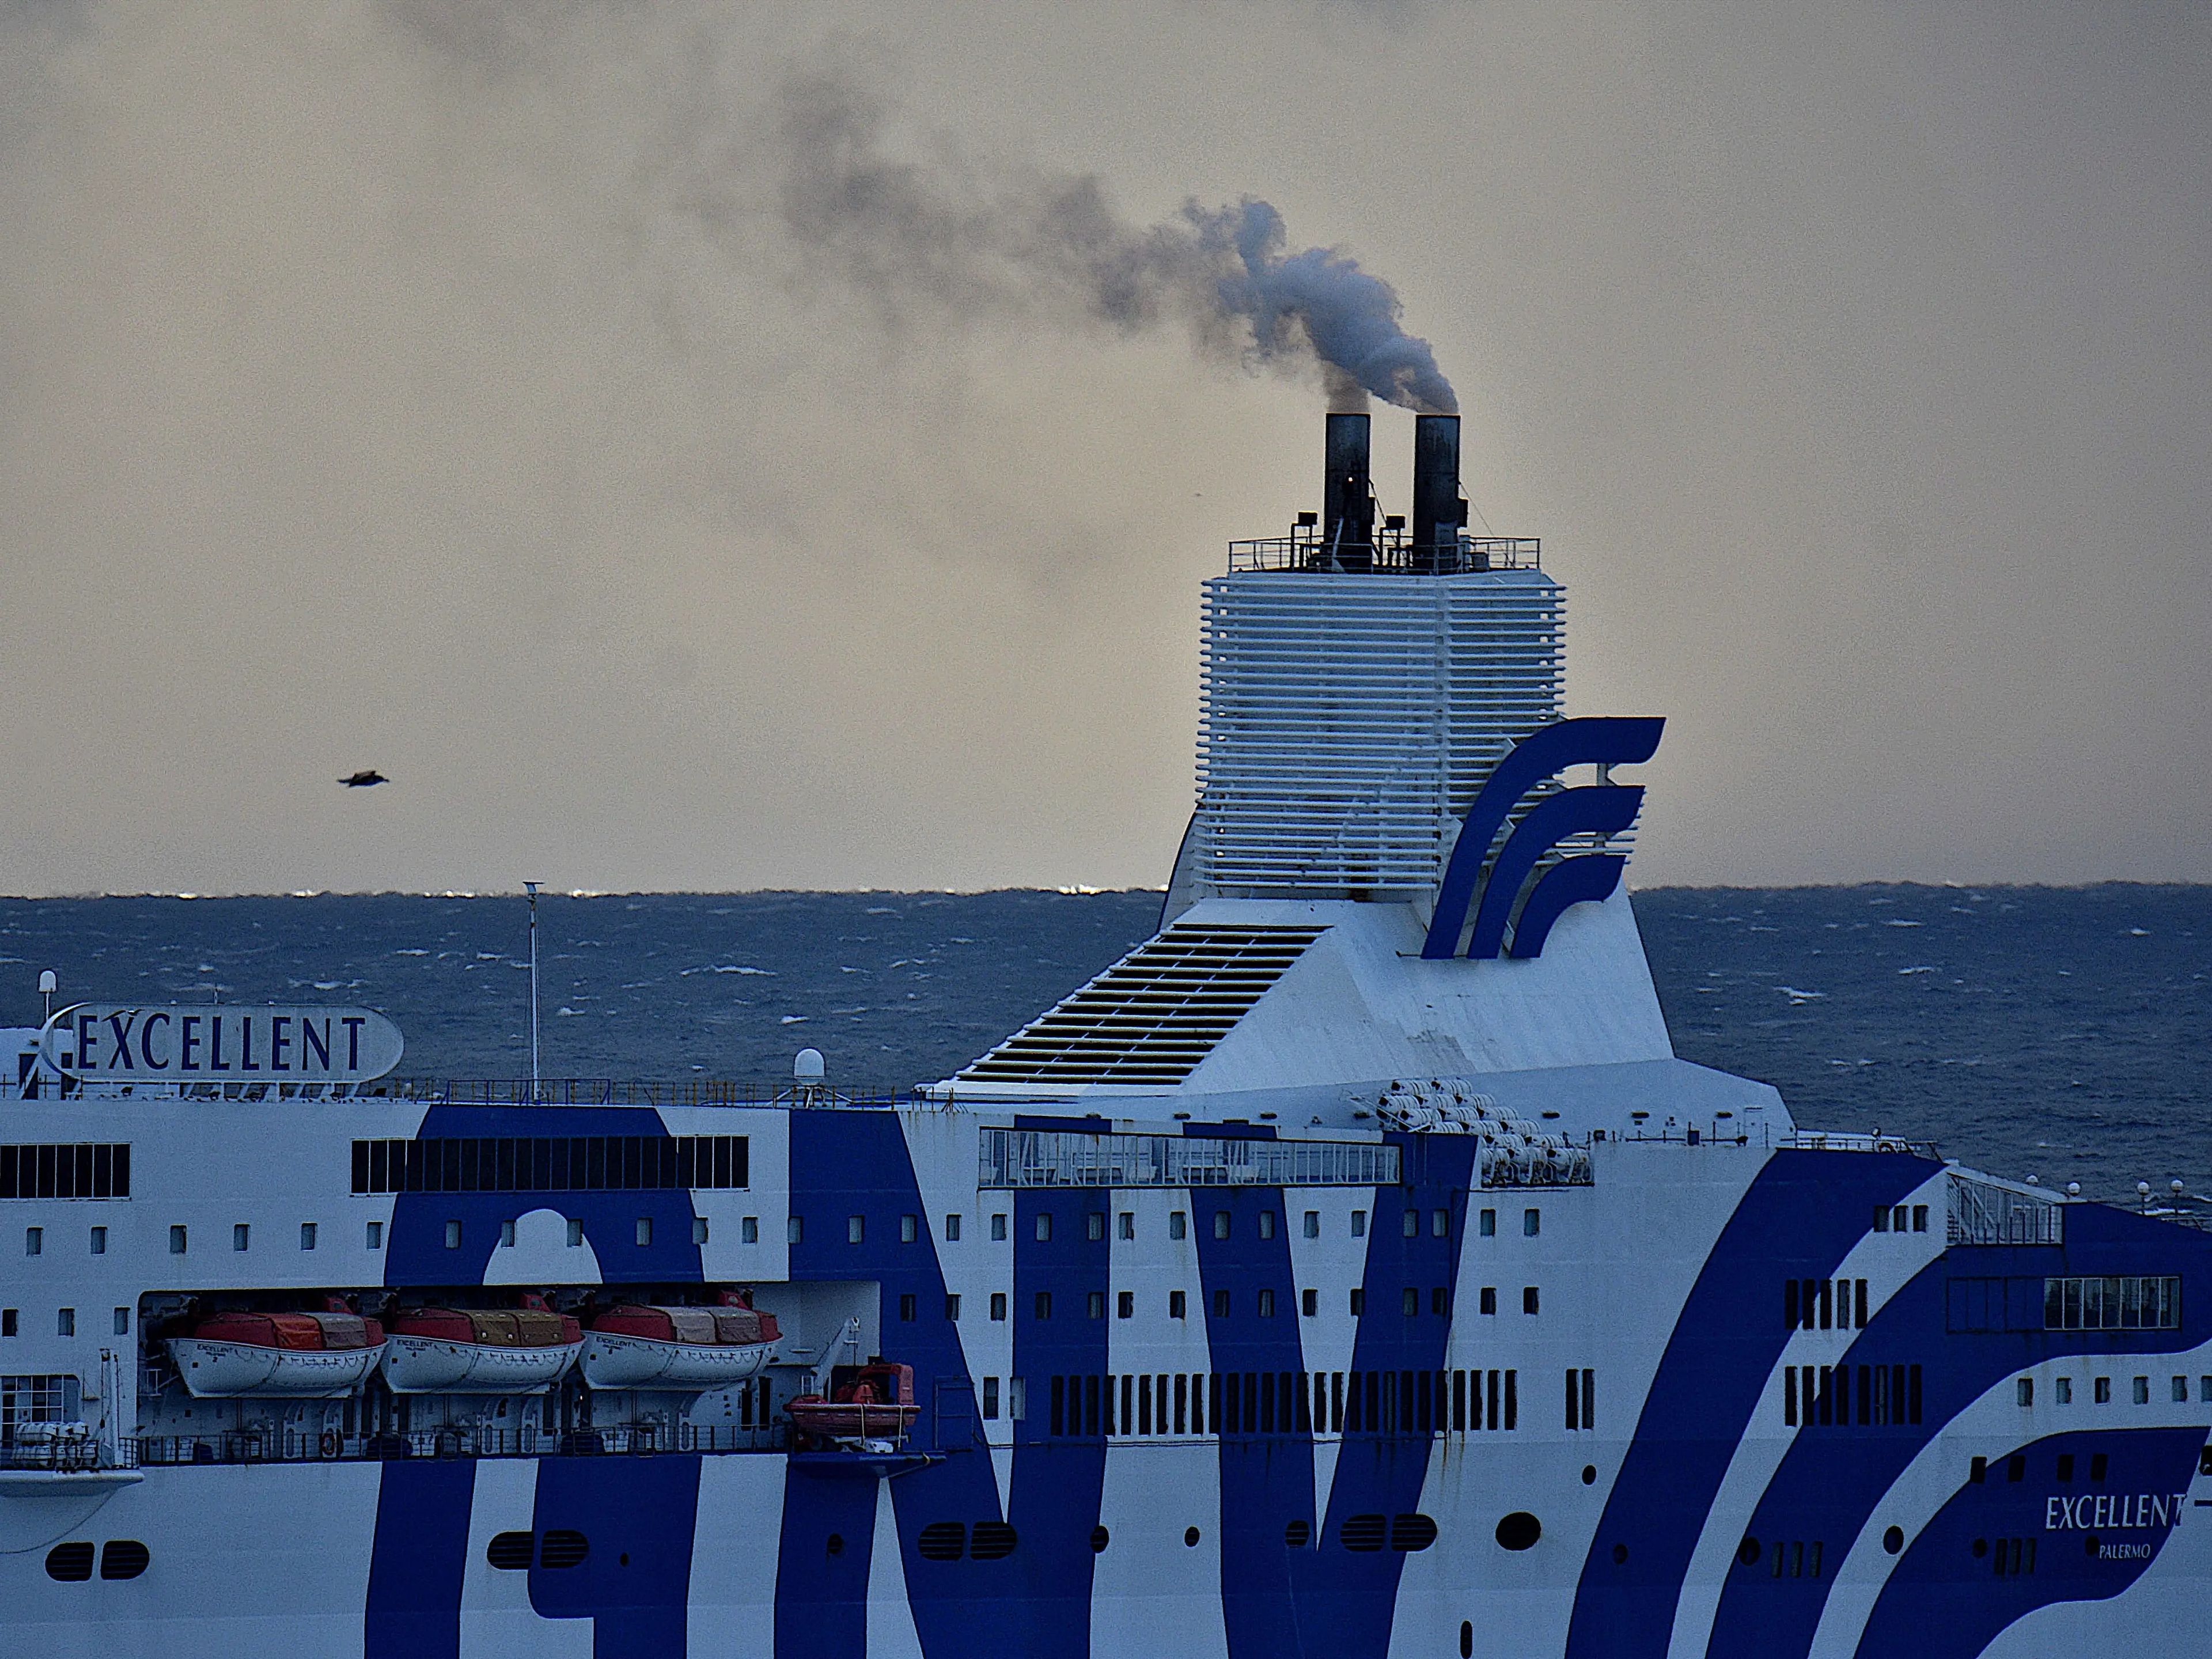 Two plumes of dark-colored smoke being released from the top of a cruise ship.